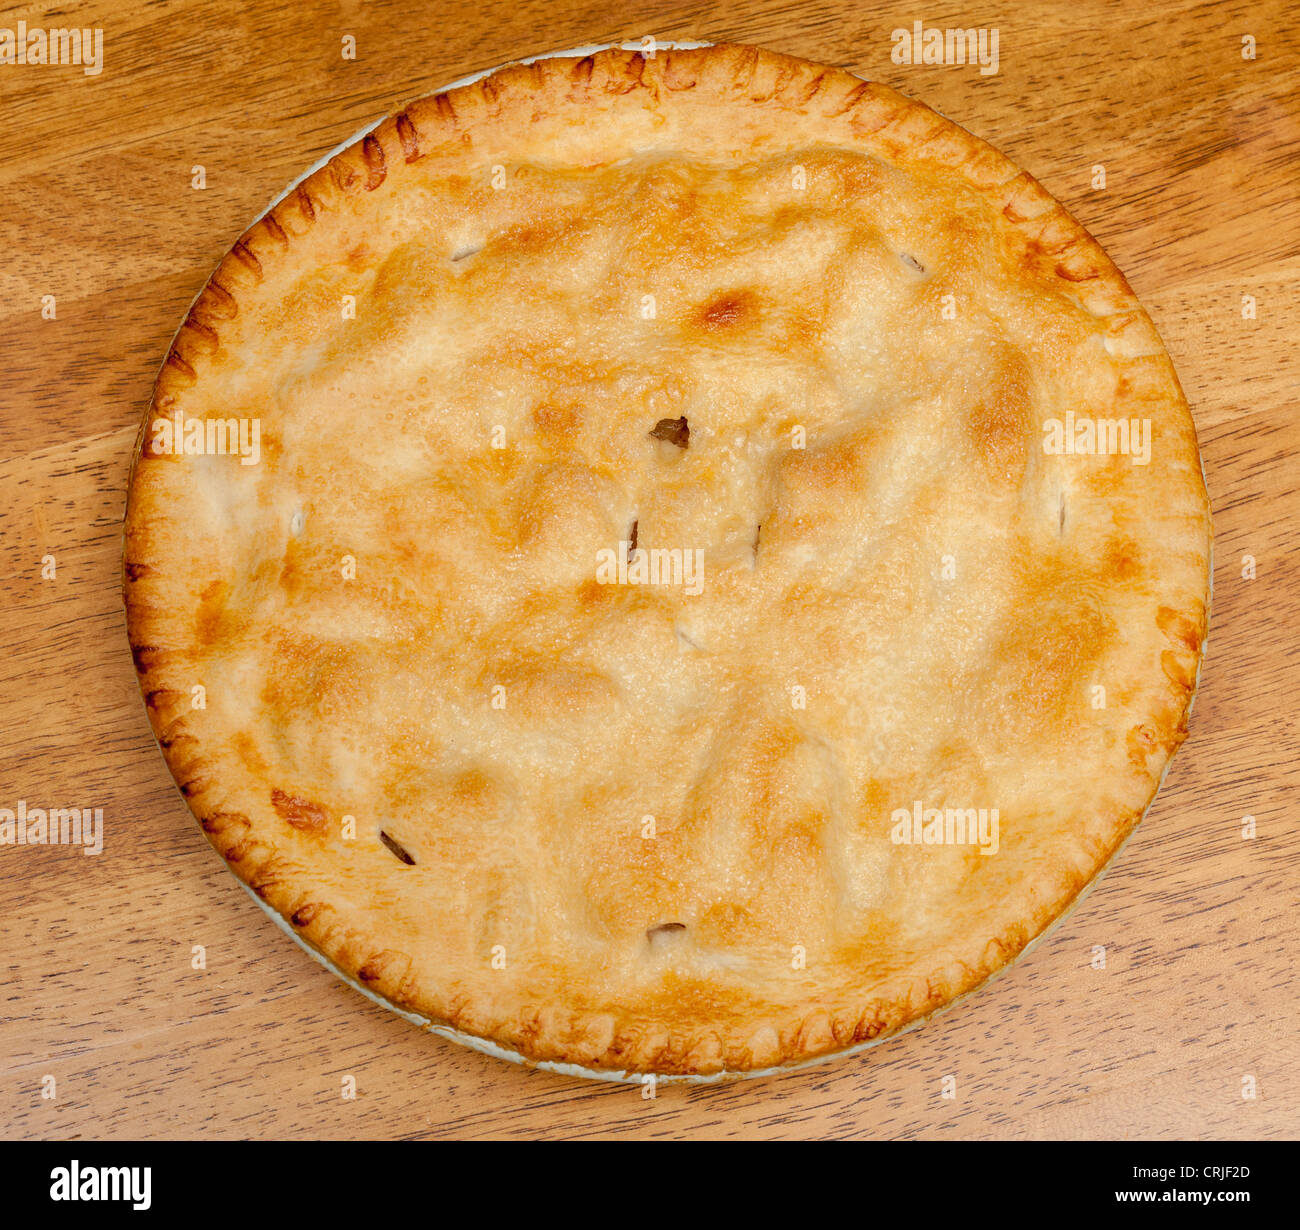 Freshly baked hot apple pie on wooden table Stock Photo